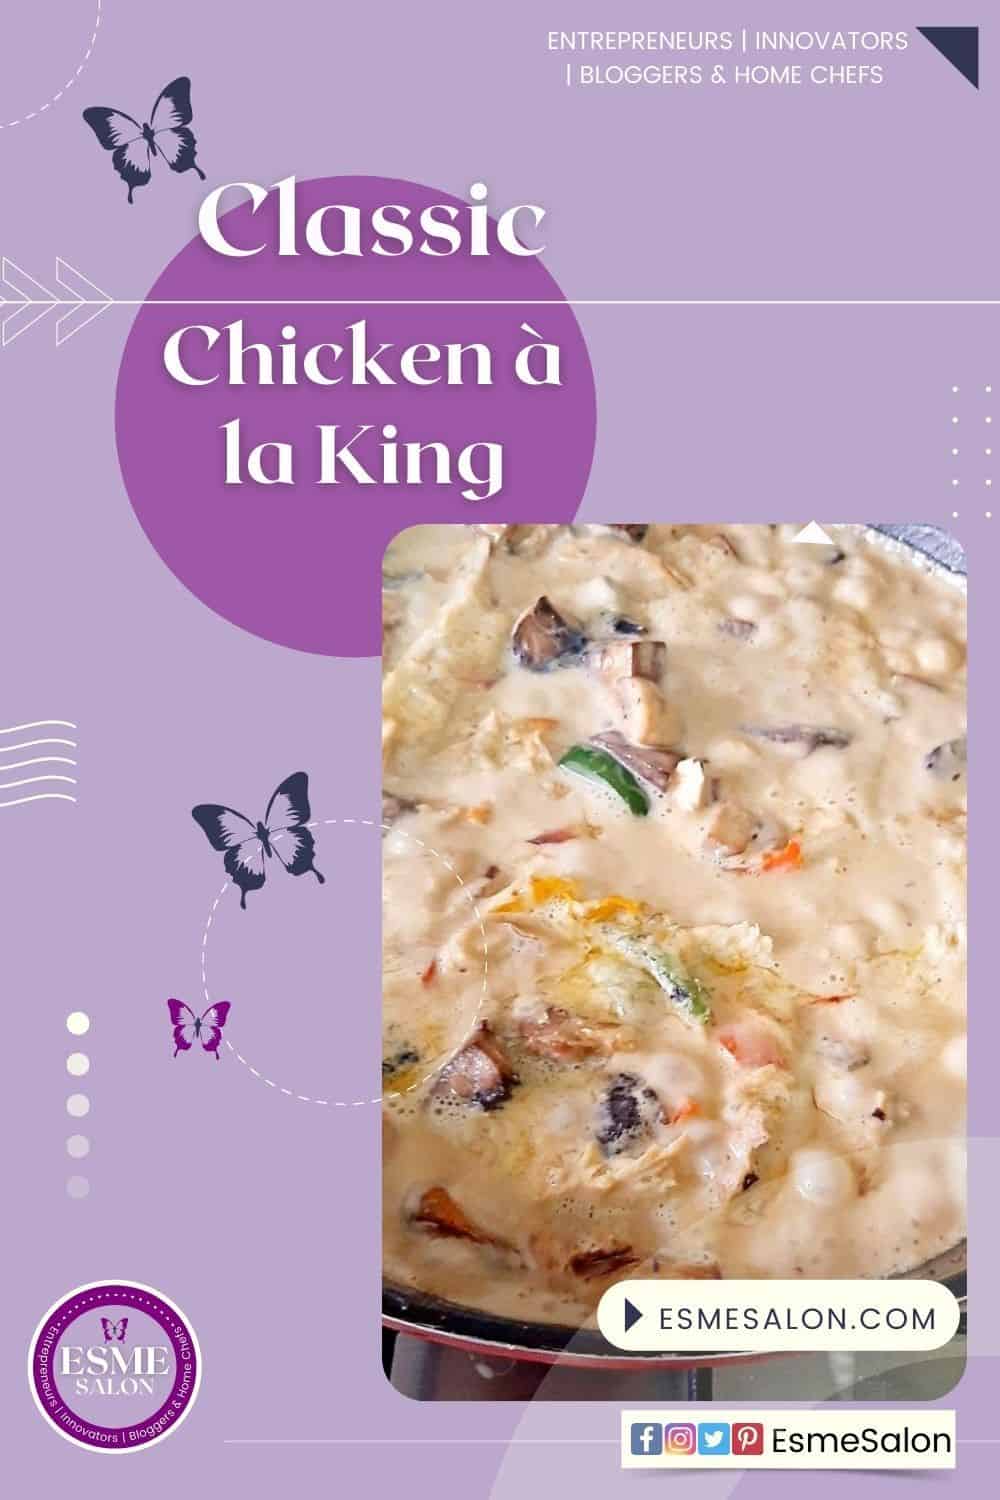 Chicken à la King is a dish consisting of diced chicken in a cream sauce, mushrooms, and vegetables, served over rice, noodles, or bread.